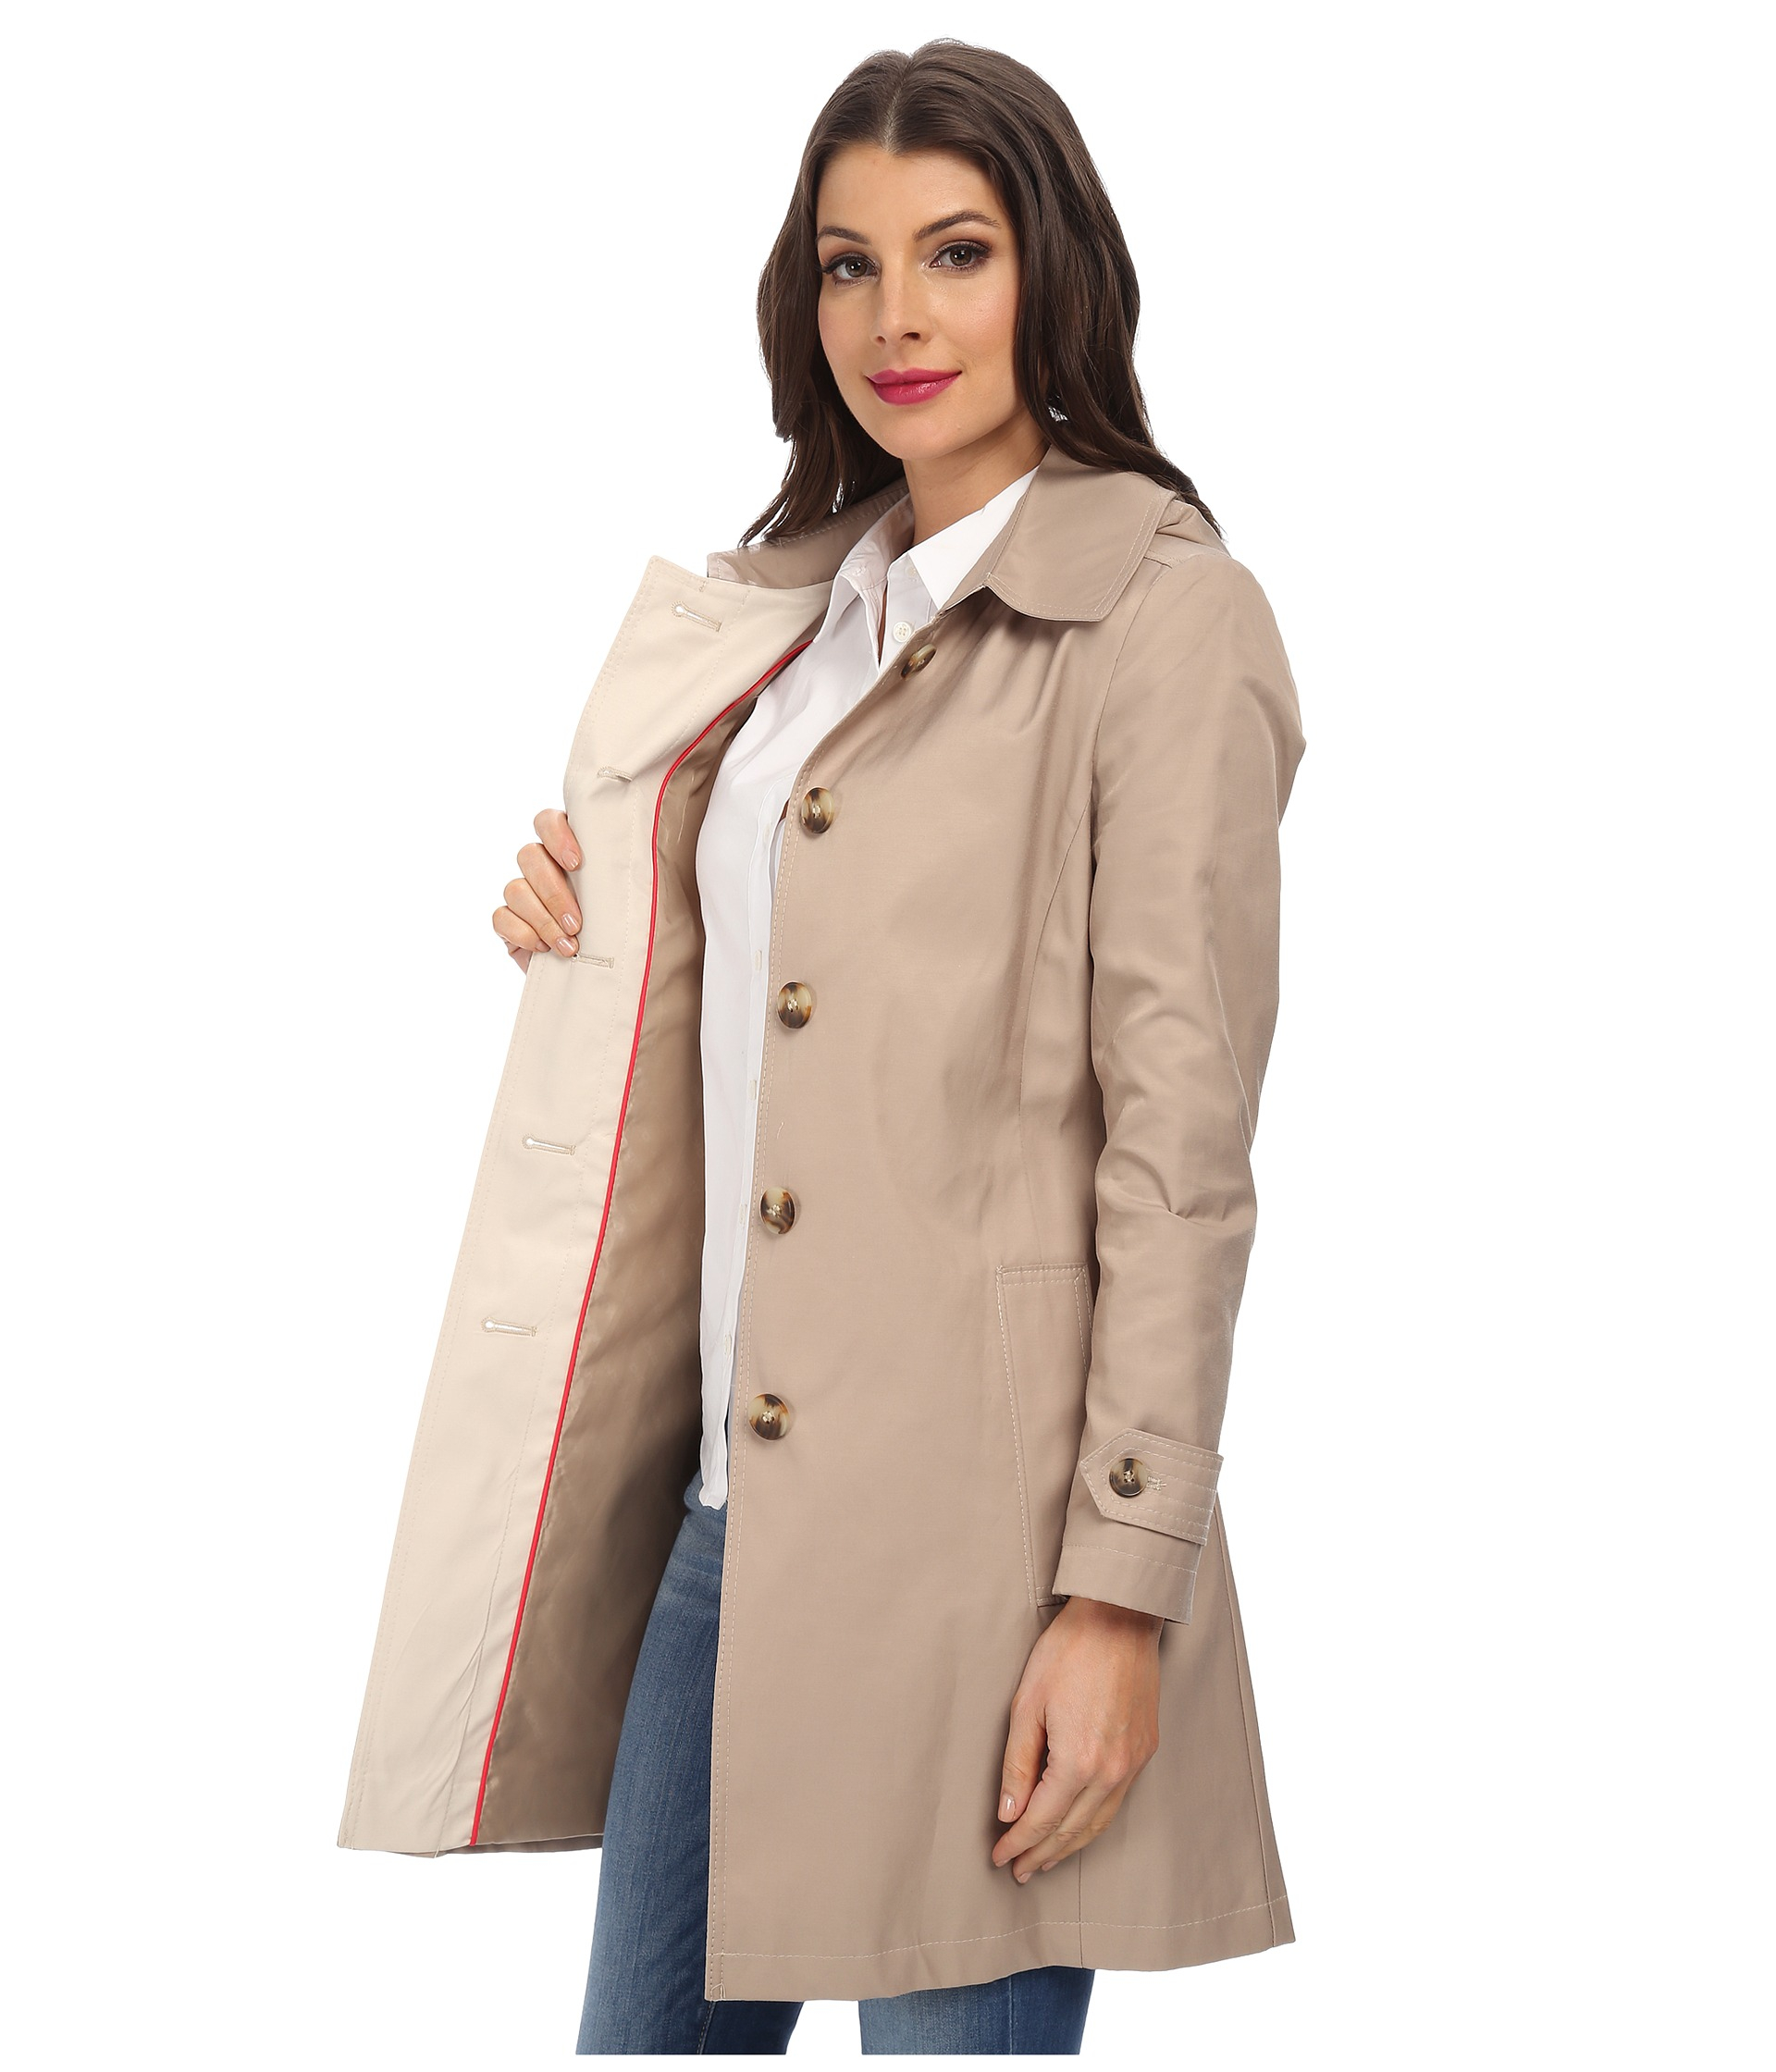 Dkny Single Breasted Hooded Belted Trench Coat in Natural | Lyst